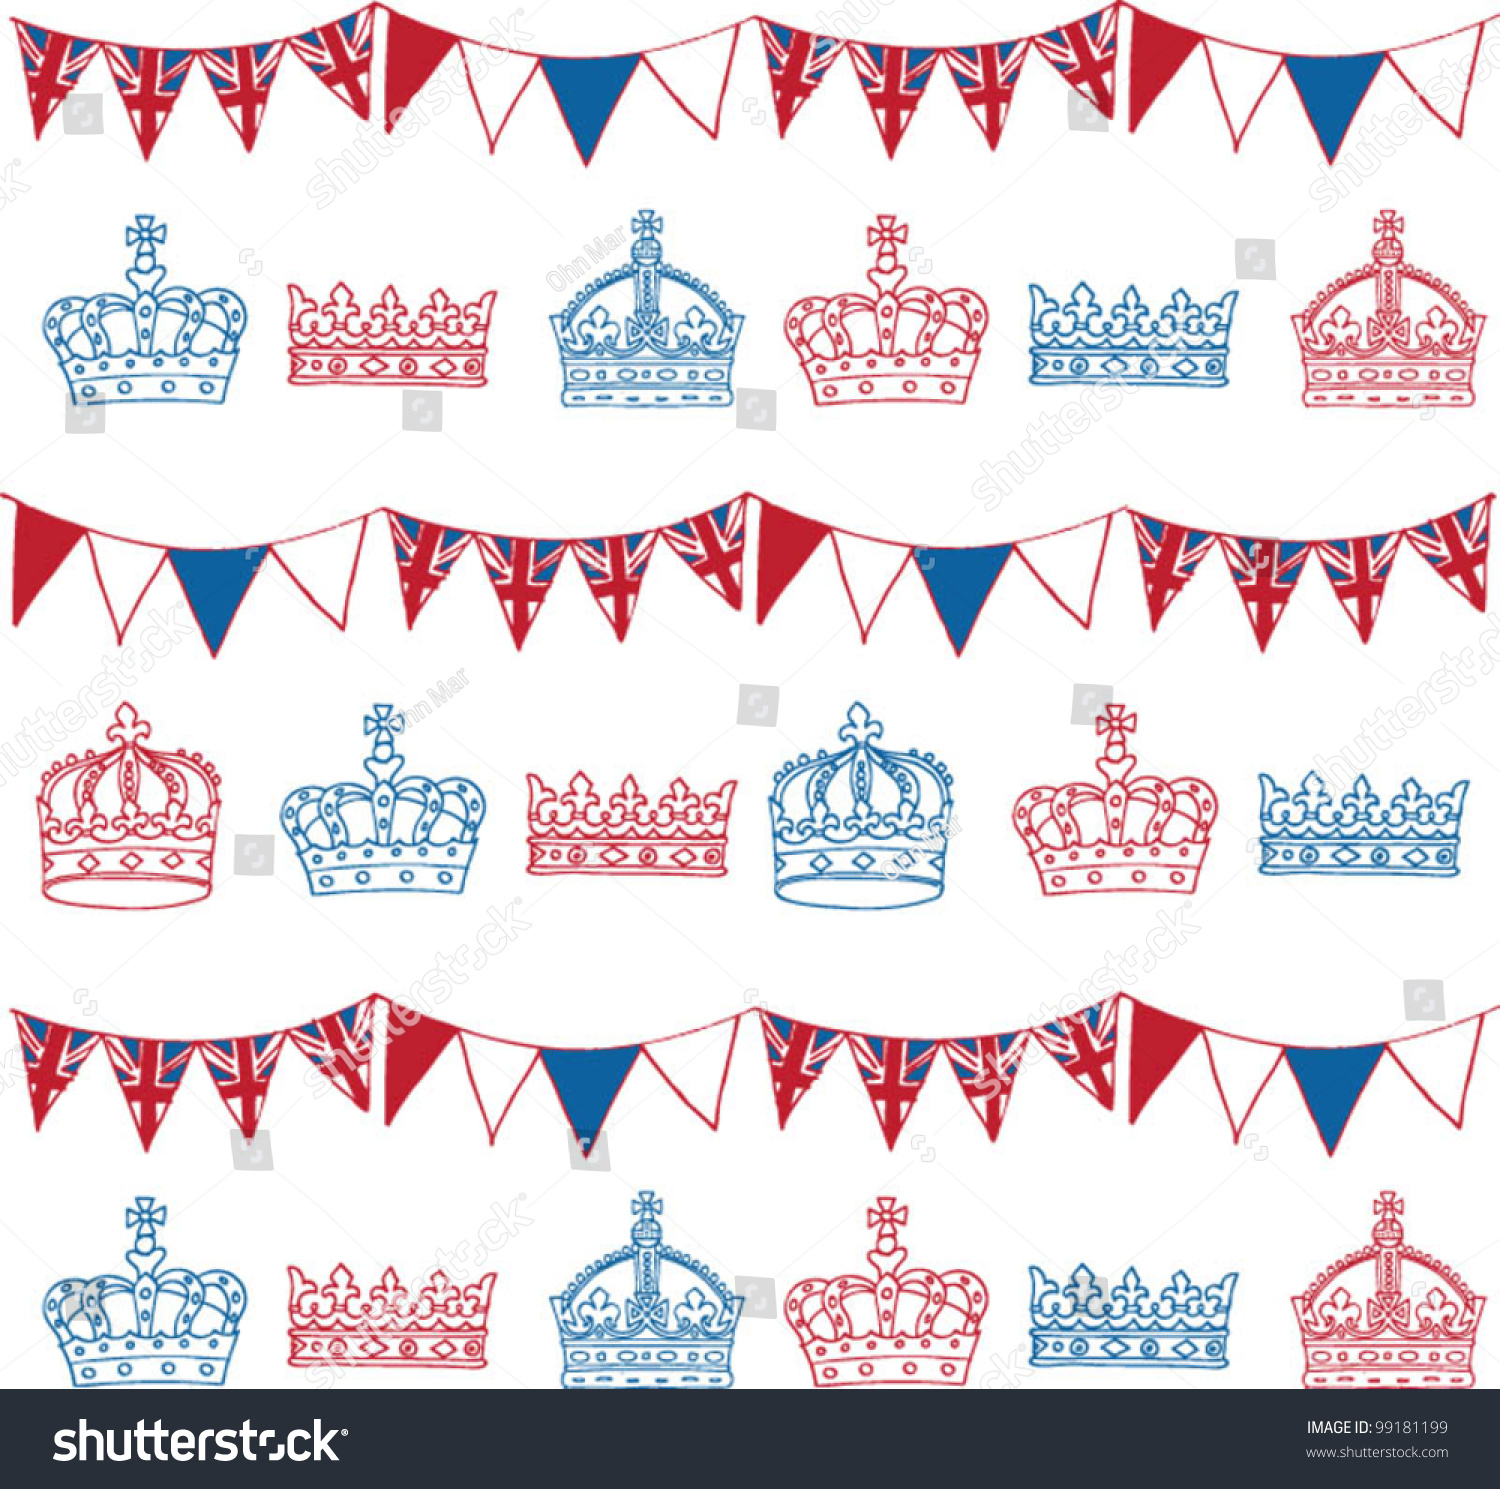 SVG of Crowns and bunting doodle seamless vector svg